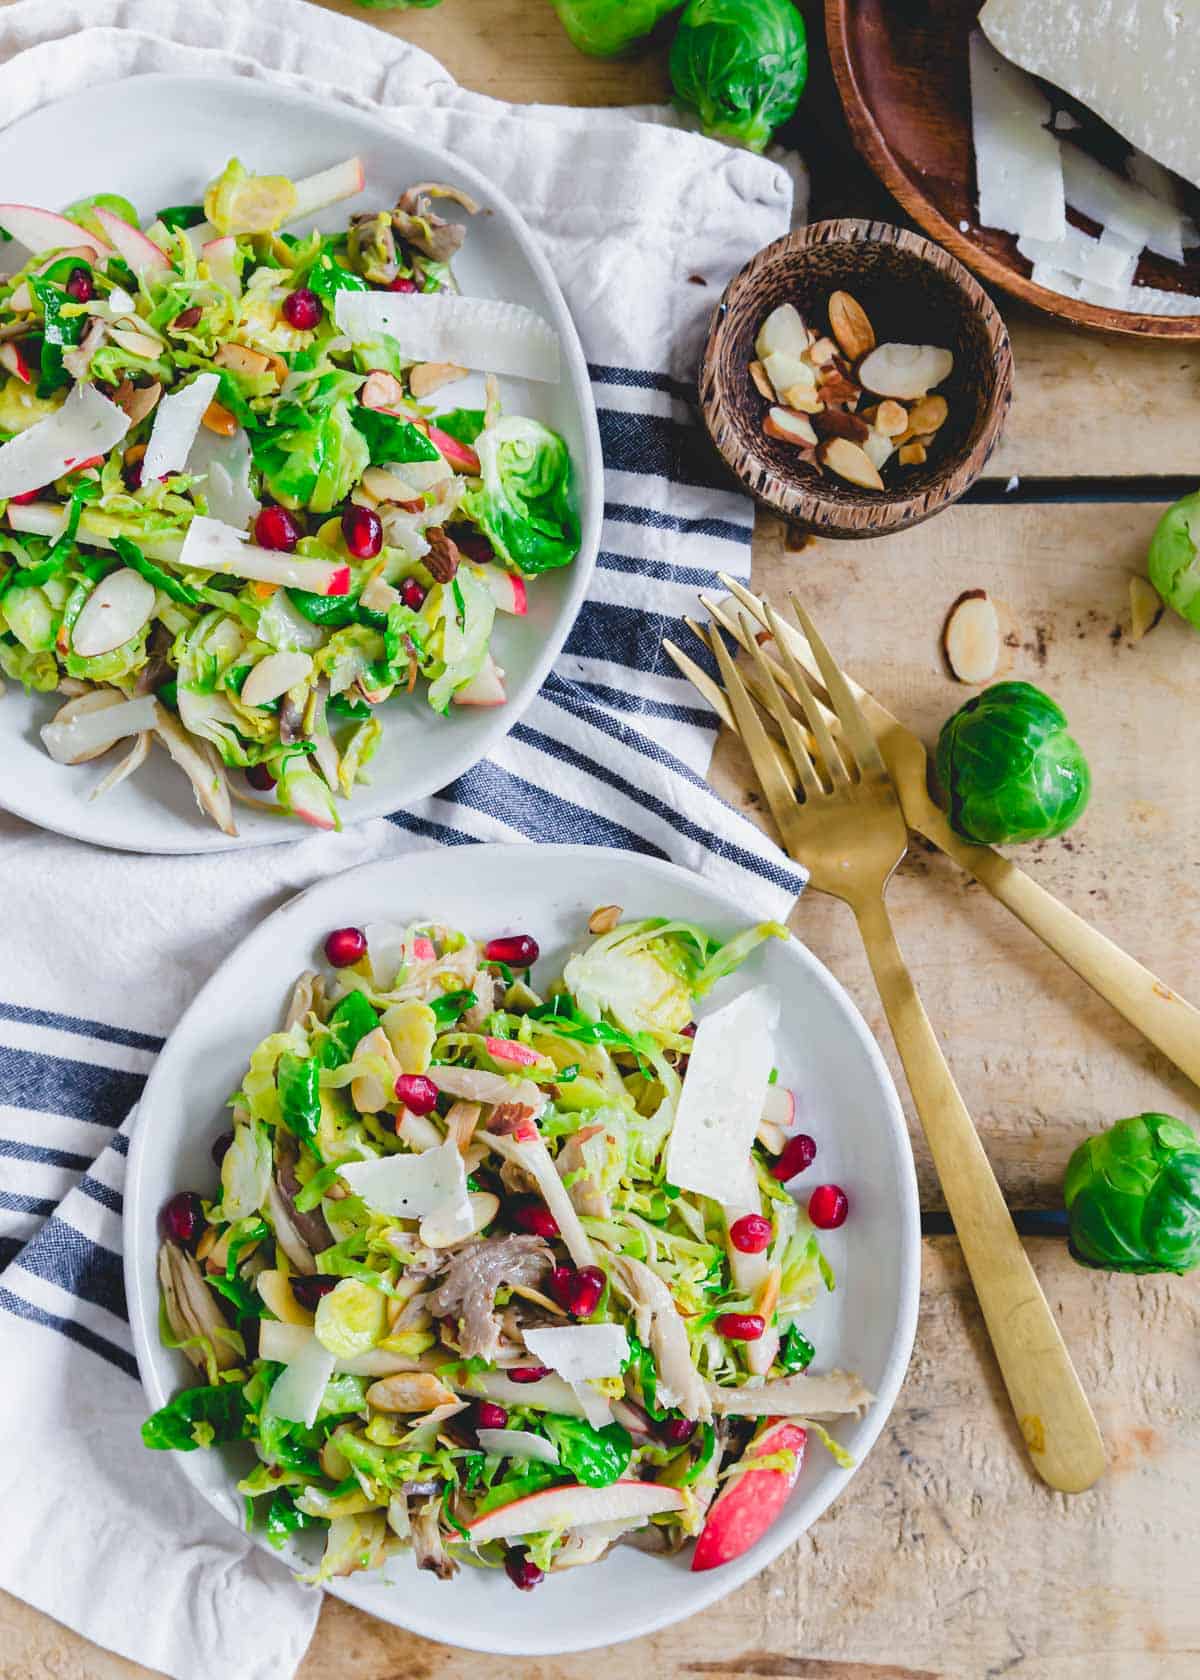 Shredded Brussels sprouts salad with chicken, apples, pomegranates, sliced almonds and pecorino cheese on a white plate with gold fork on the side.